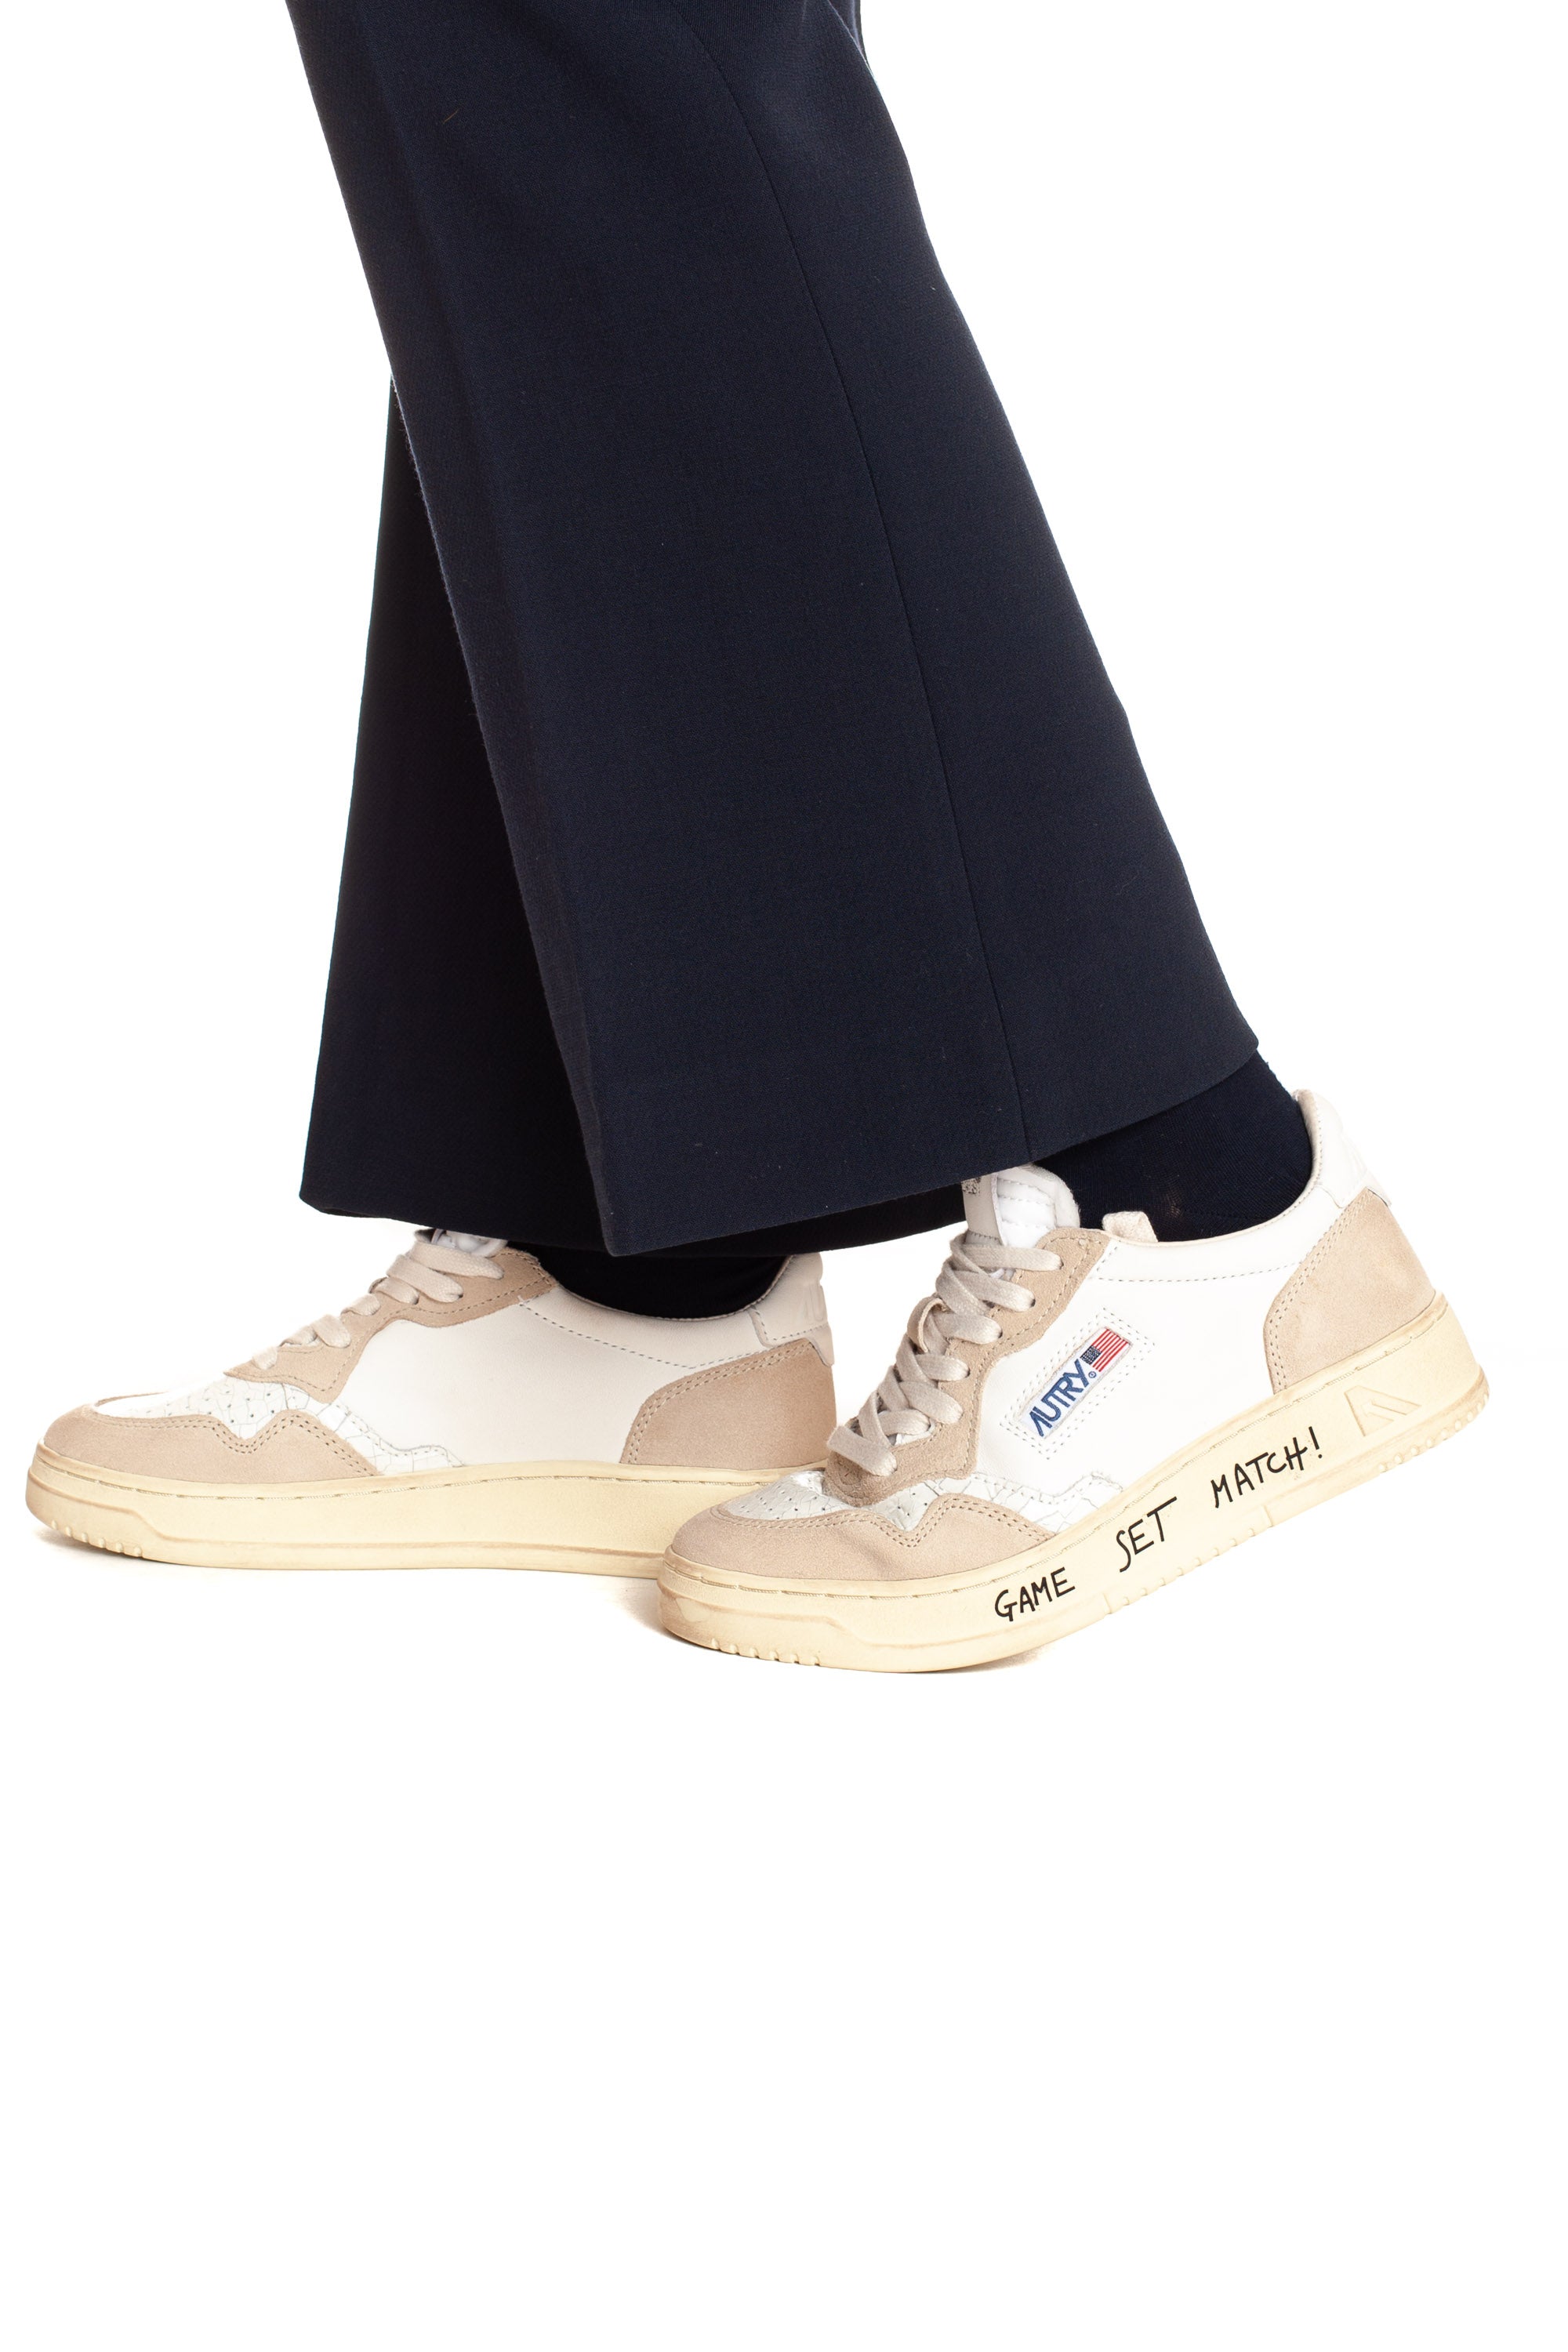 Medalist women's sneaker with white writing and heel tab